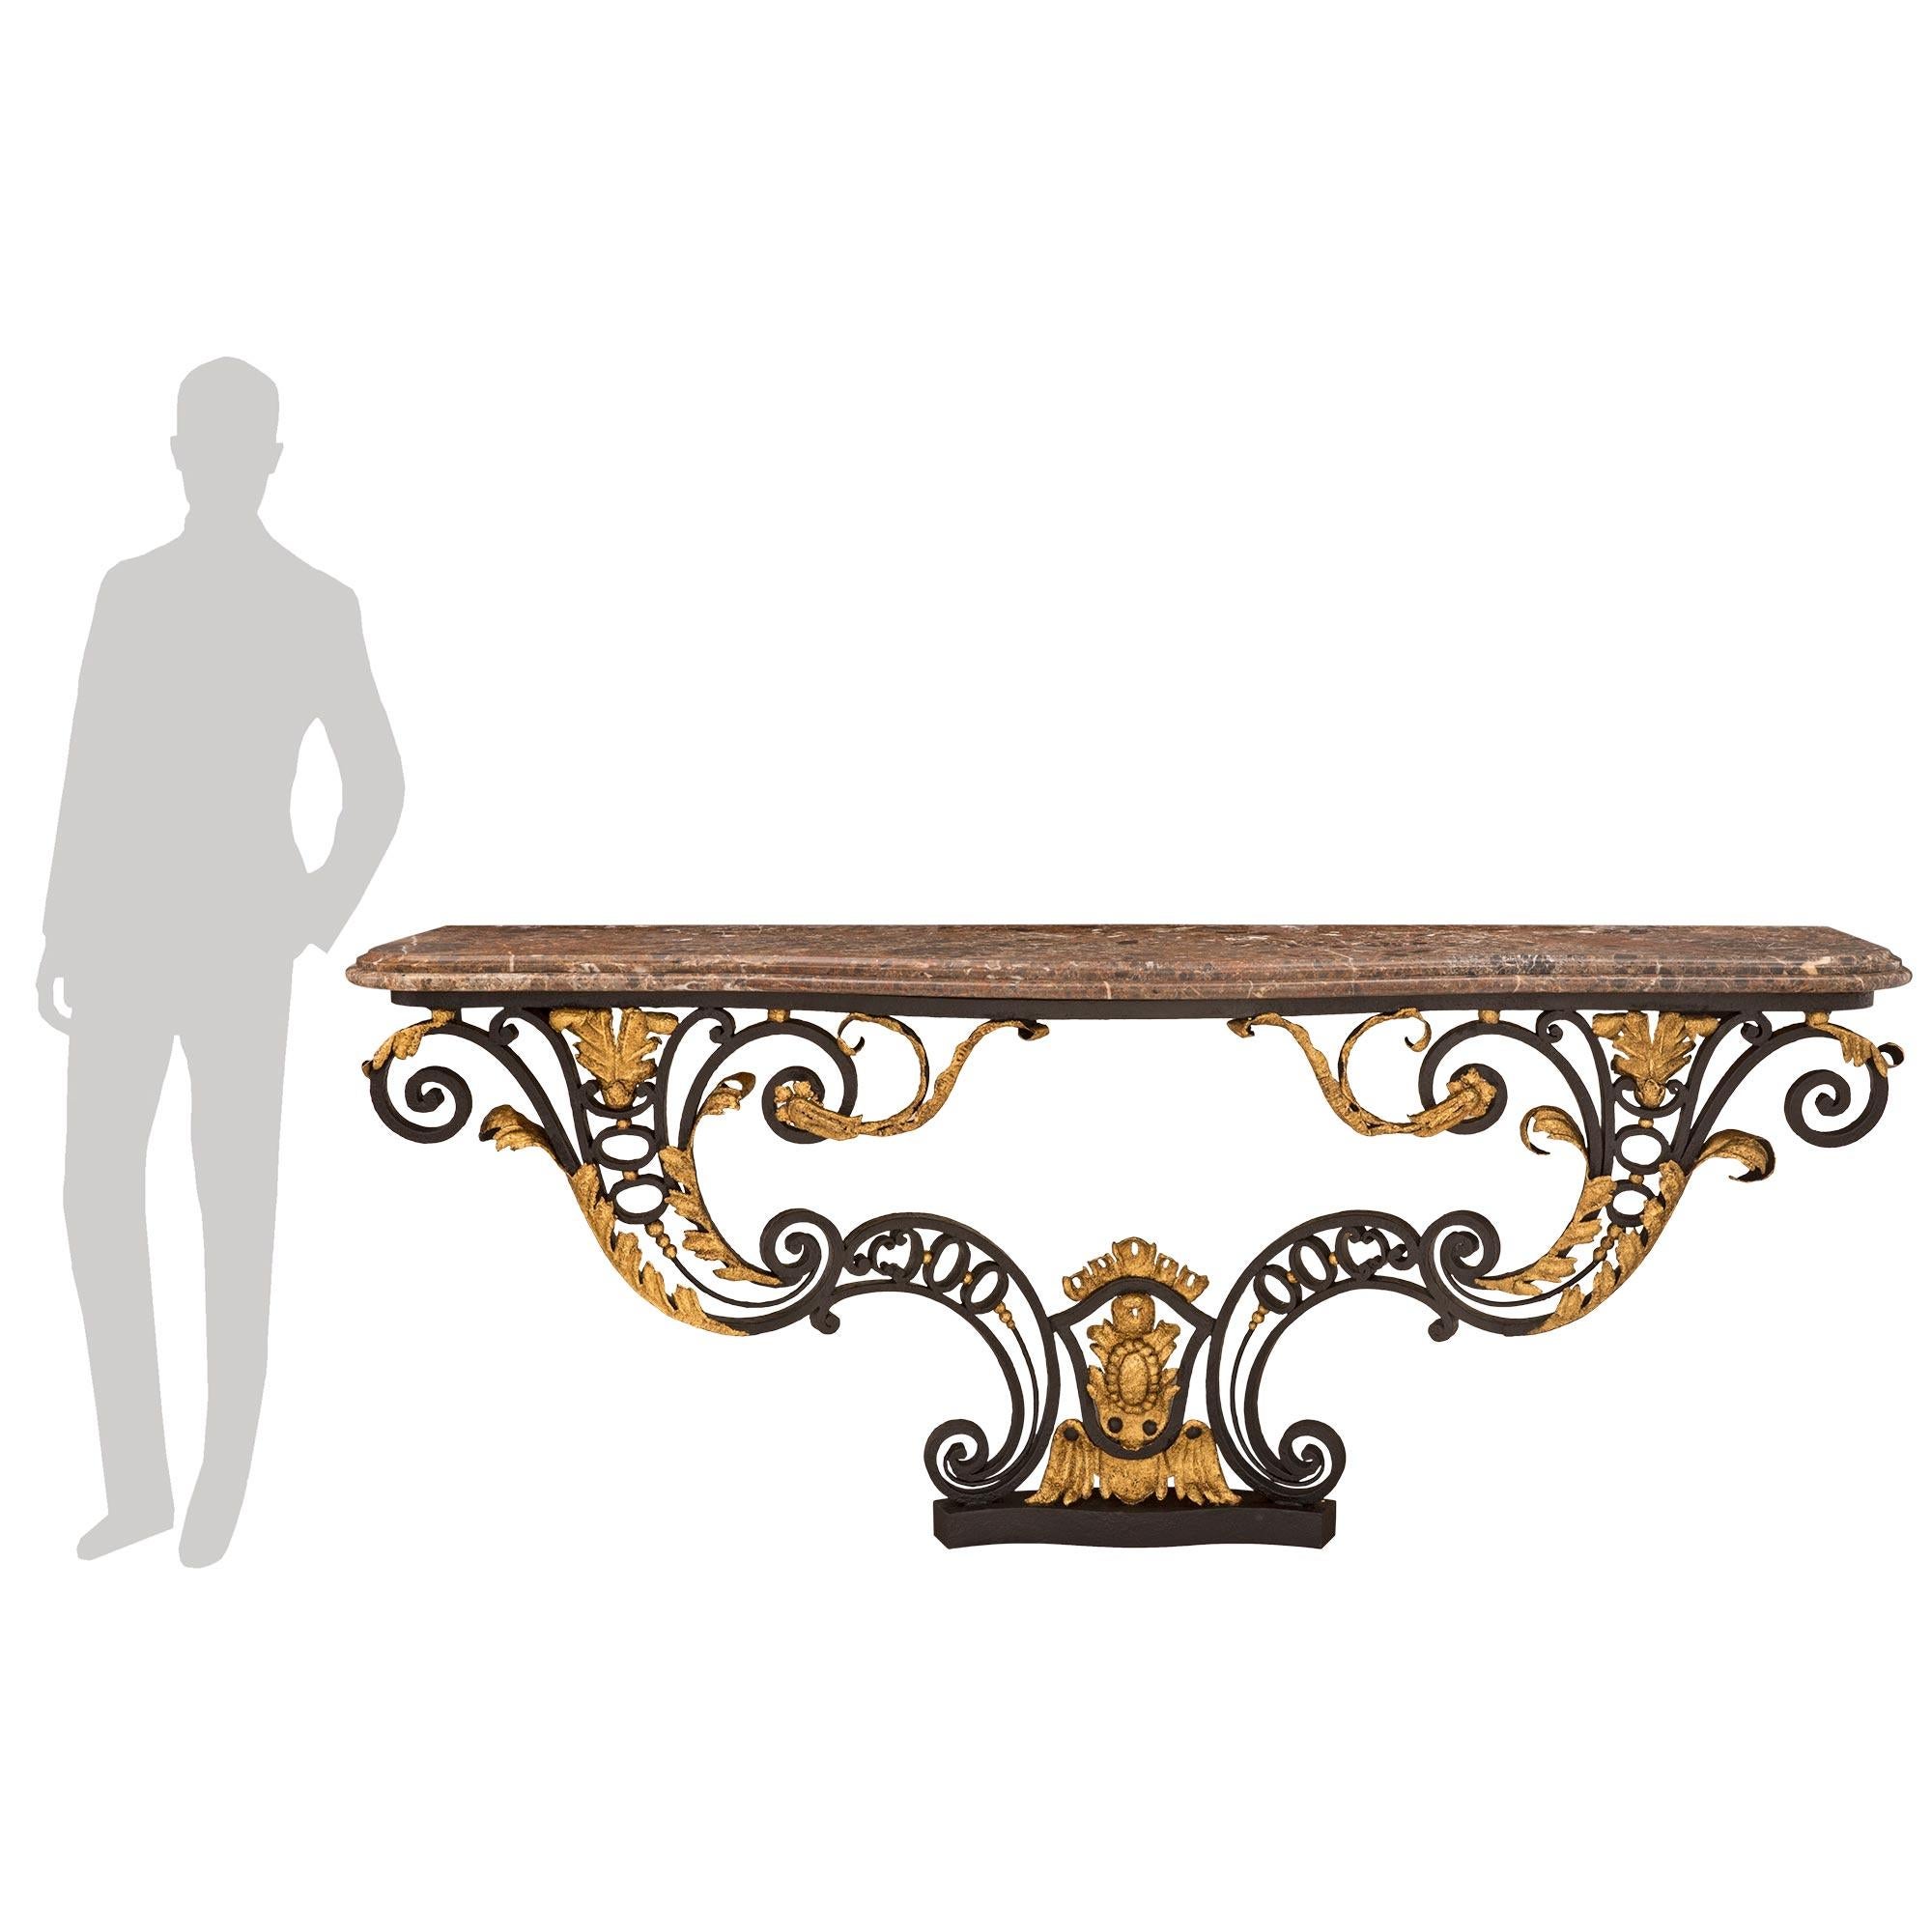 A stunning and extremely decorative Italian 18th century Louis XV st. wrought iron, gilt metal, and marble console. The wall mounted console is raised by a fine scalloped base from where the impressive pieced scrolled supports lead upwards. Each